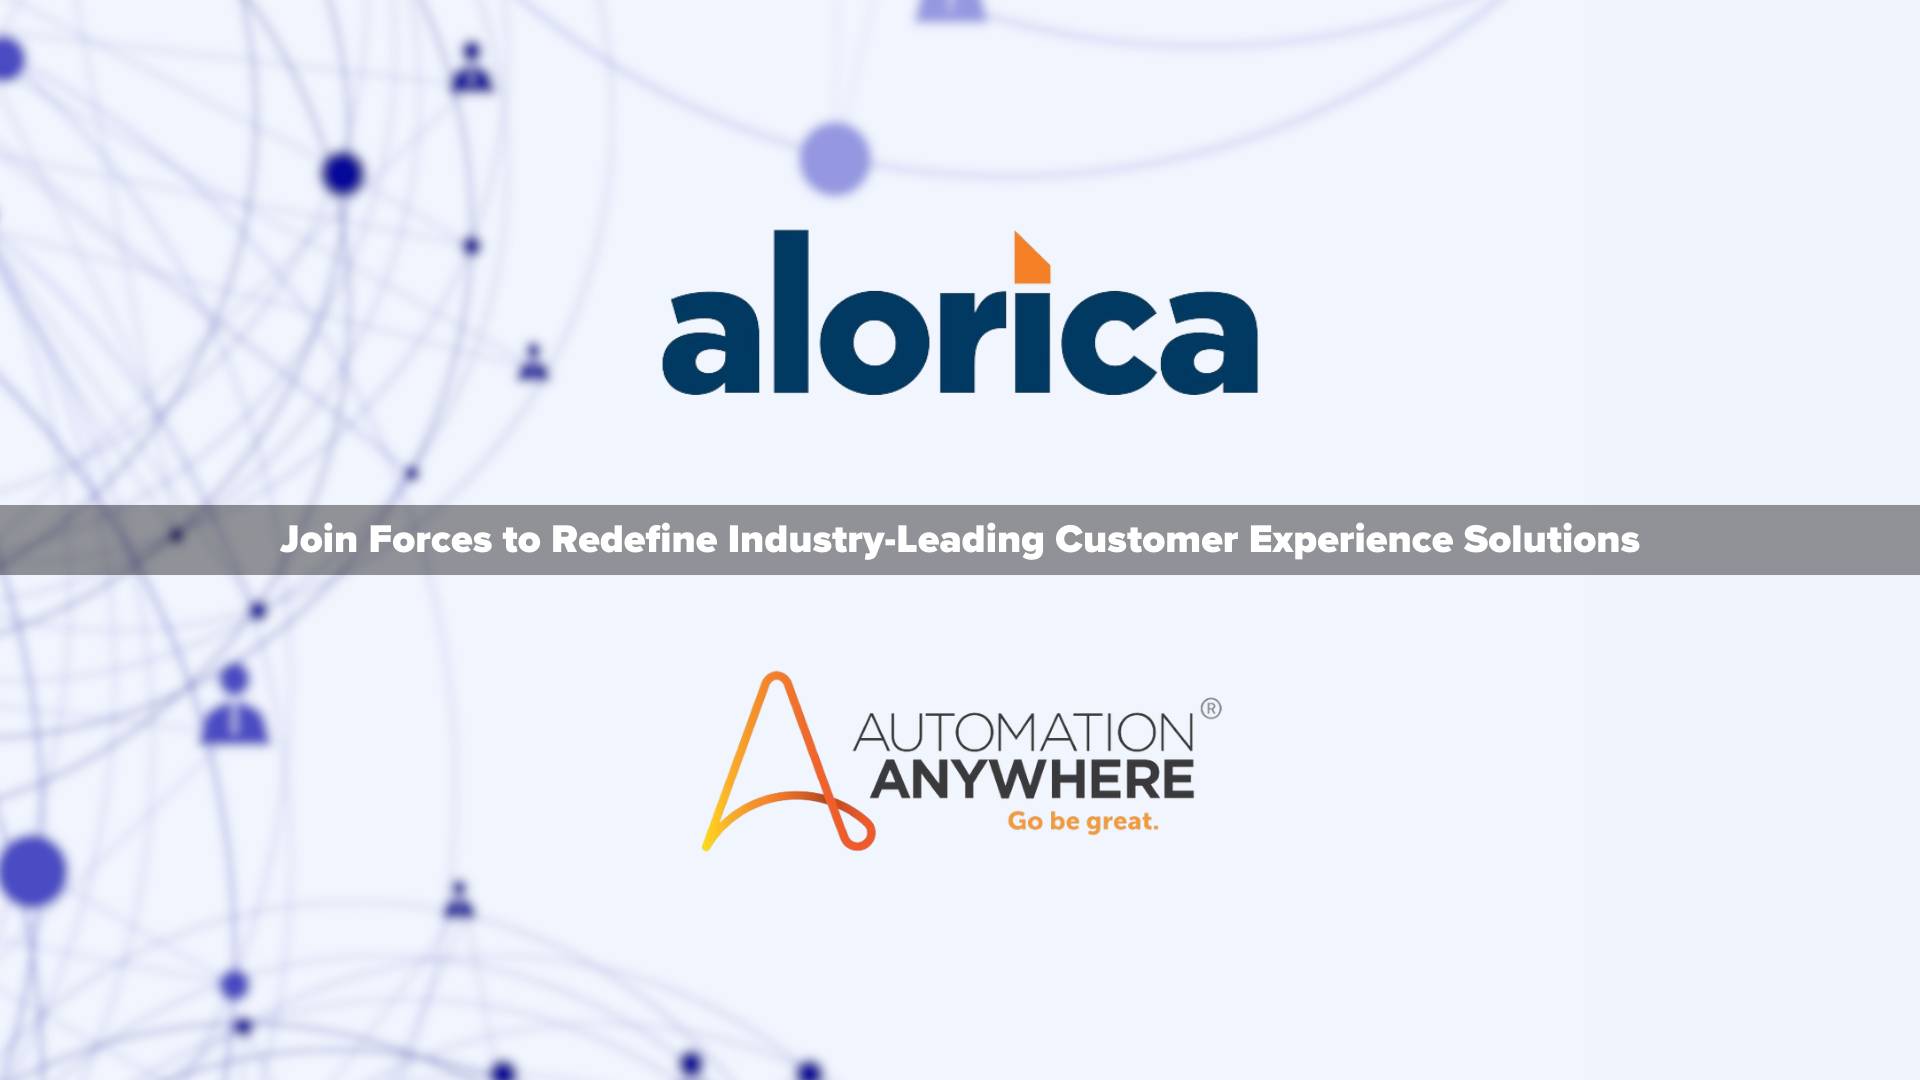 Alorica and Automation Anywhere Join Forces to Redefine Industry-Leading Customer Experience (CX) Solutions